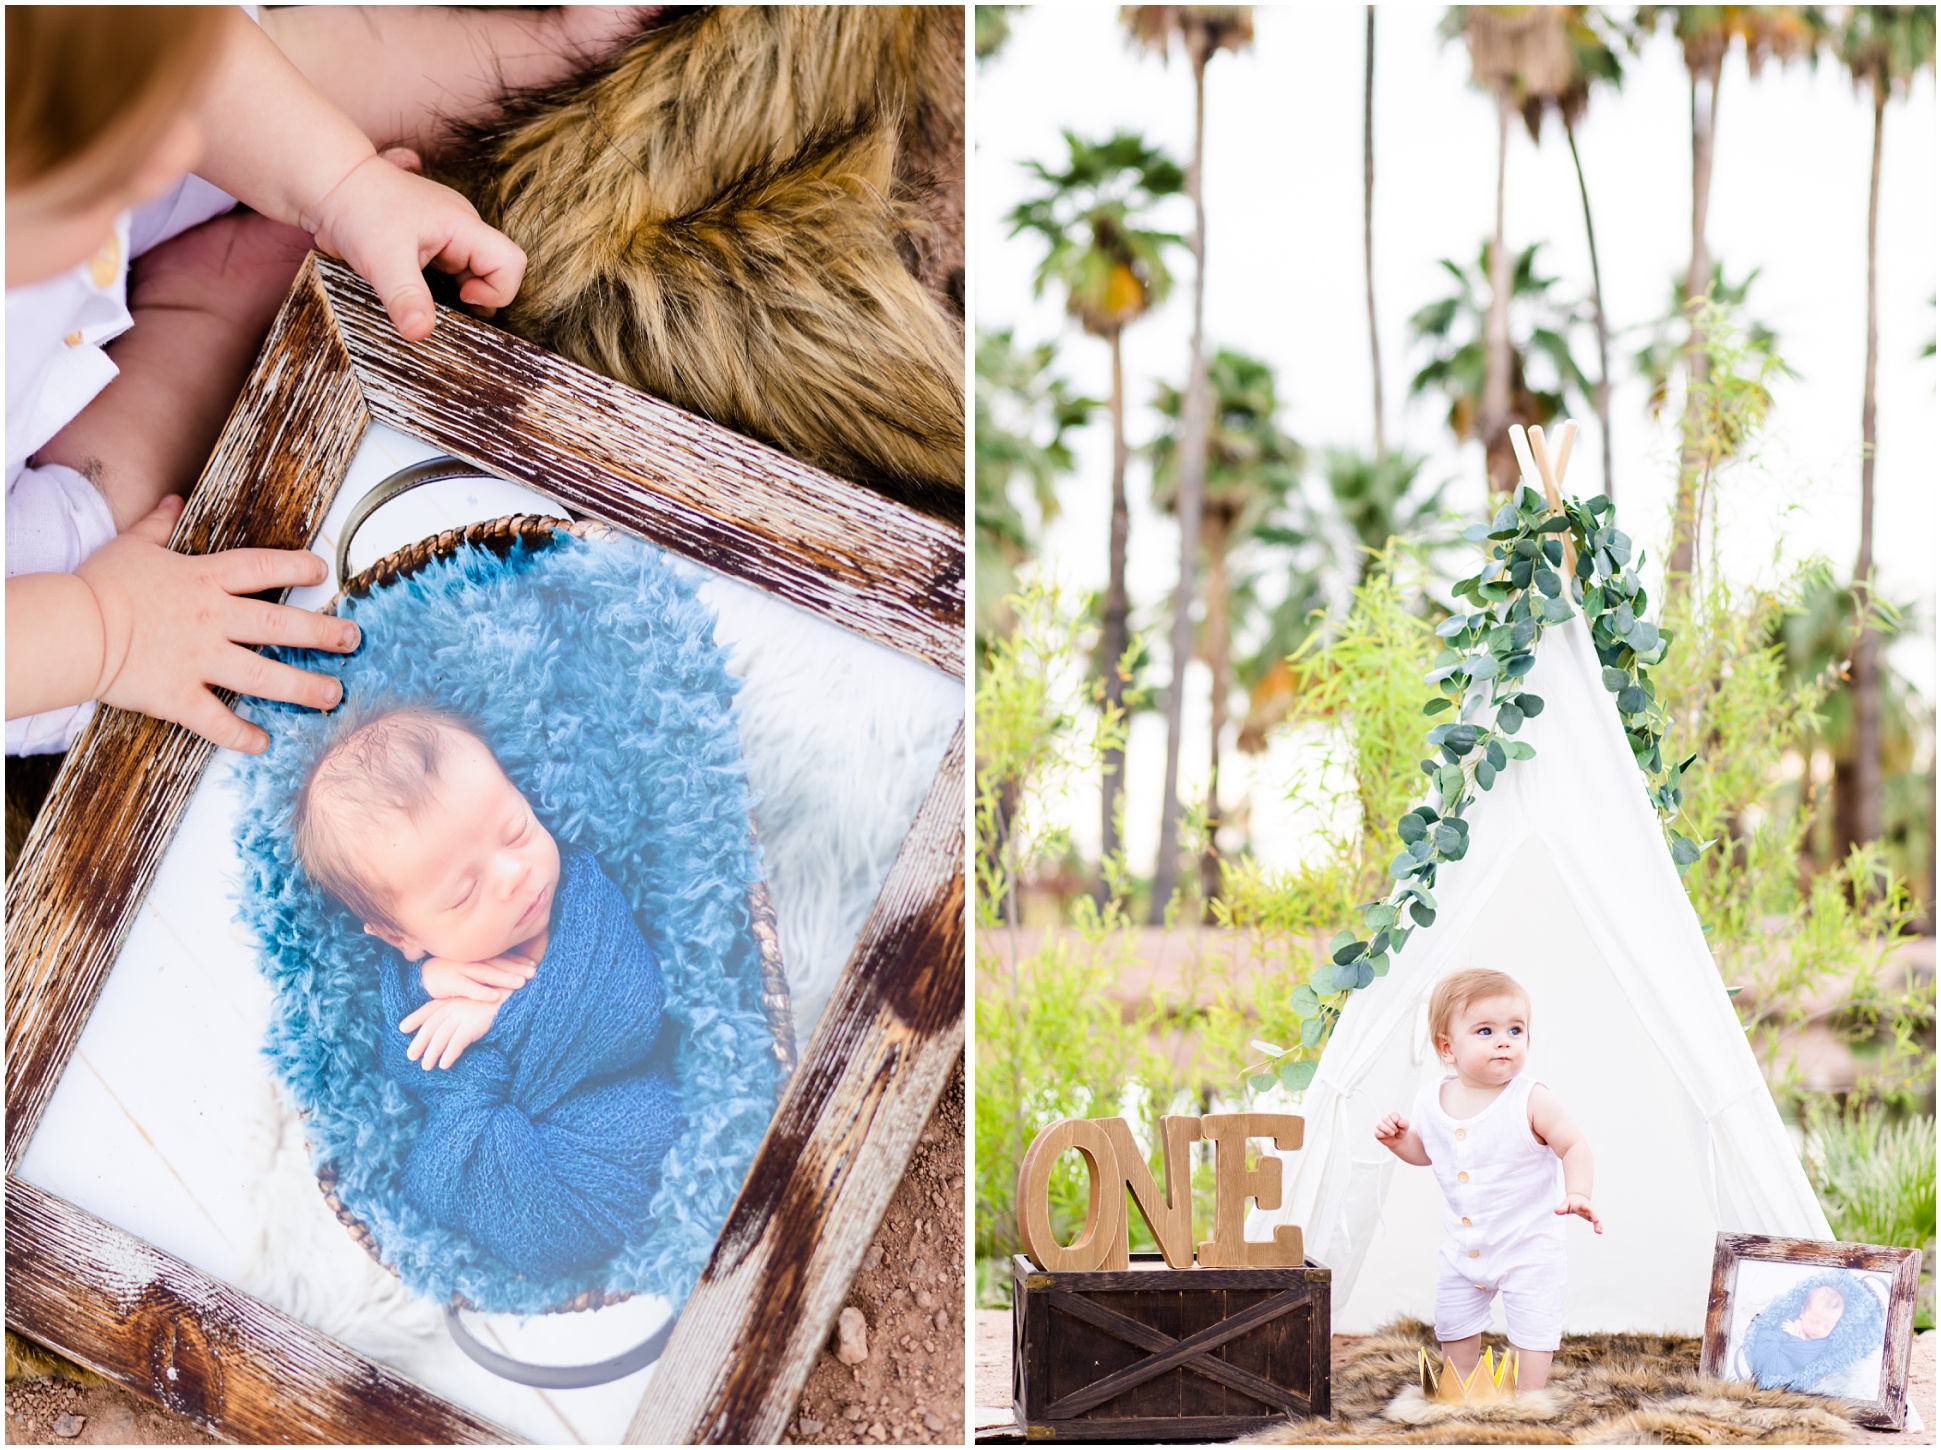 Left: Karysn holding a picture of his newborn picture, Right: Karsyn hanging out in his tent